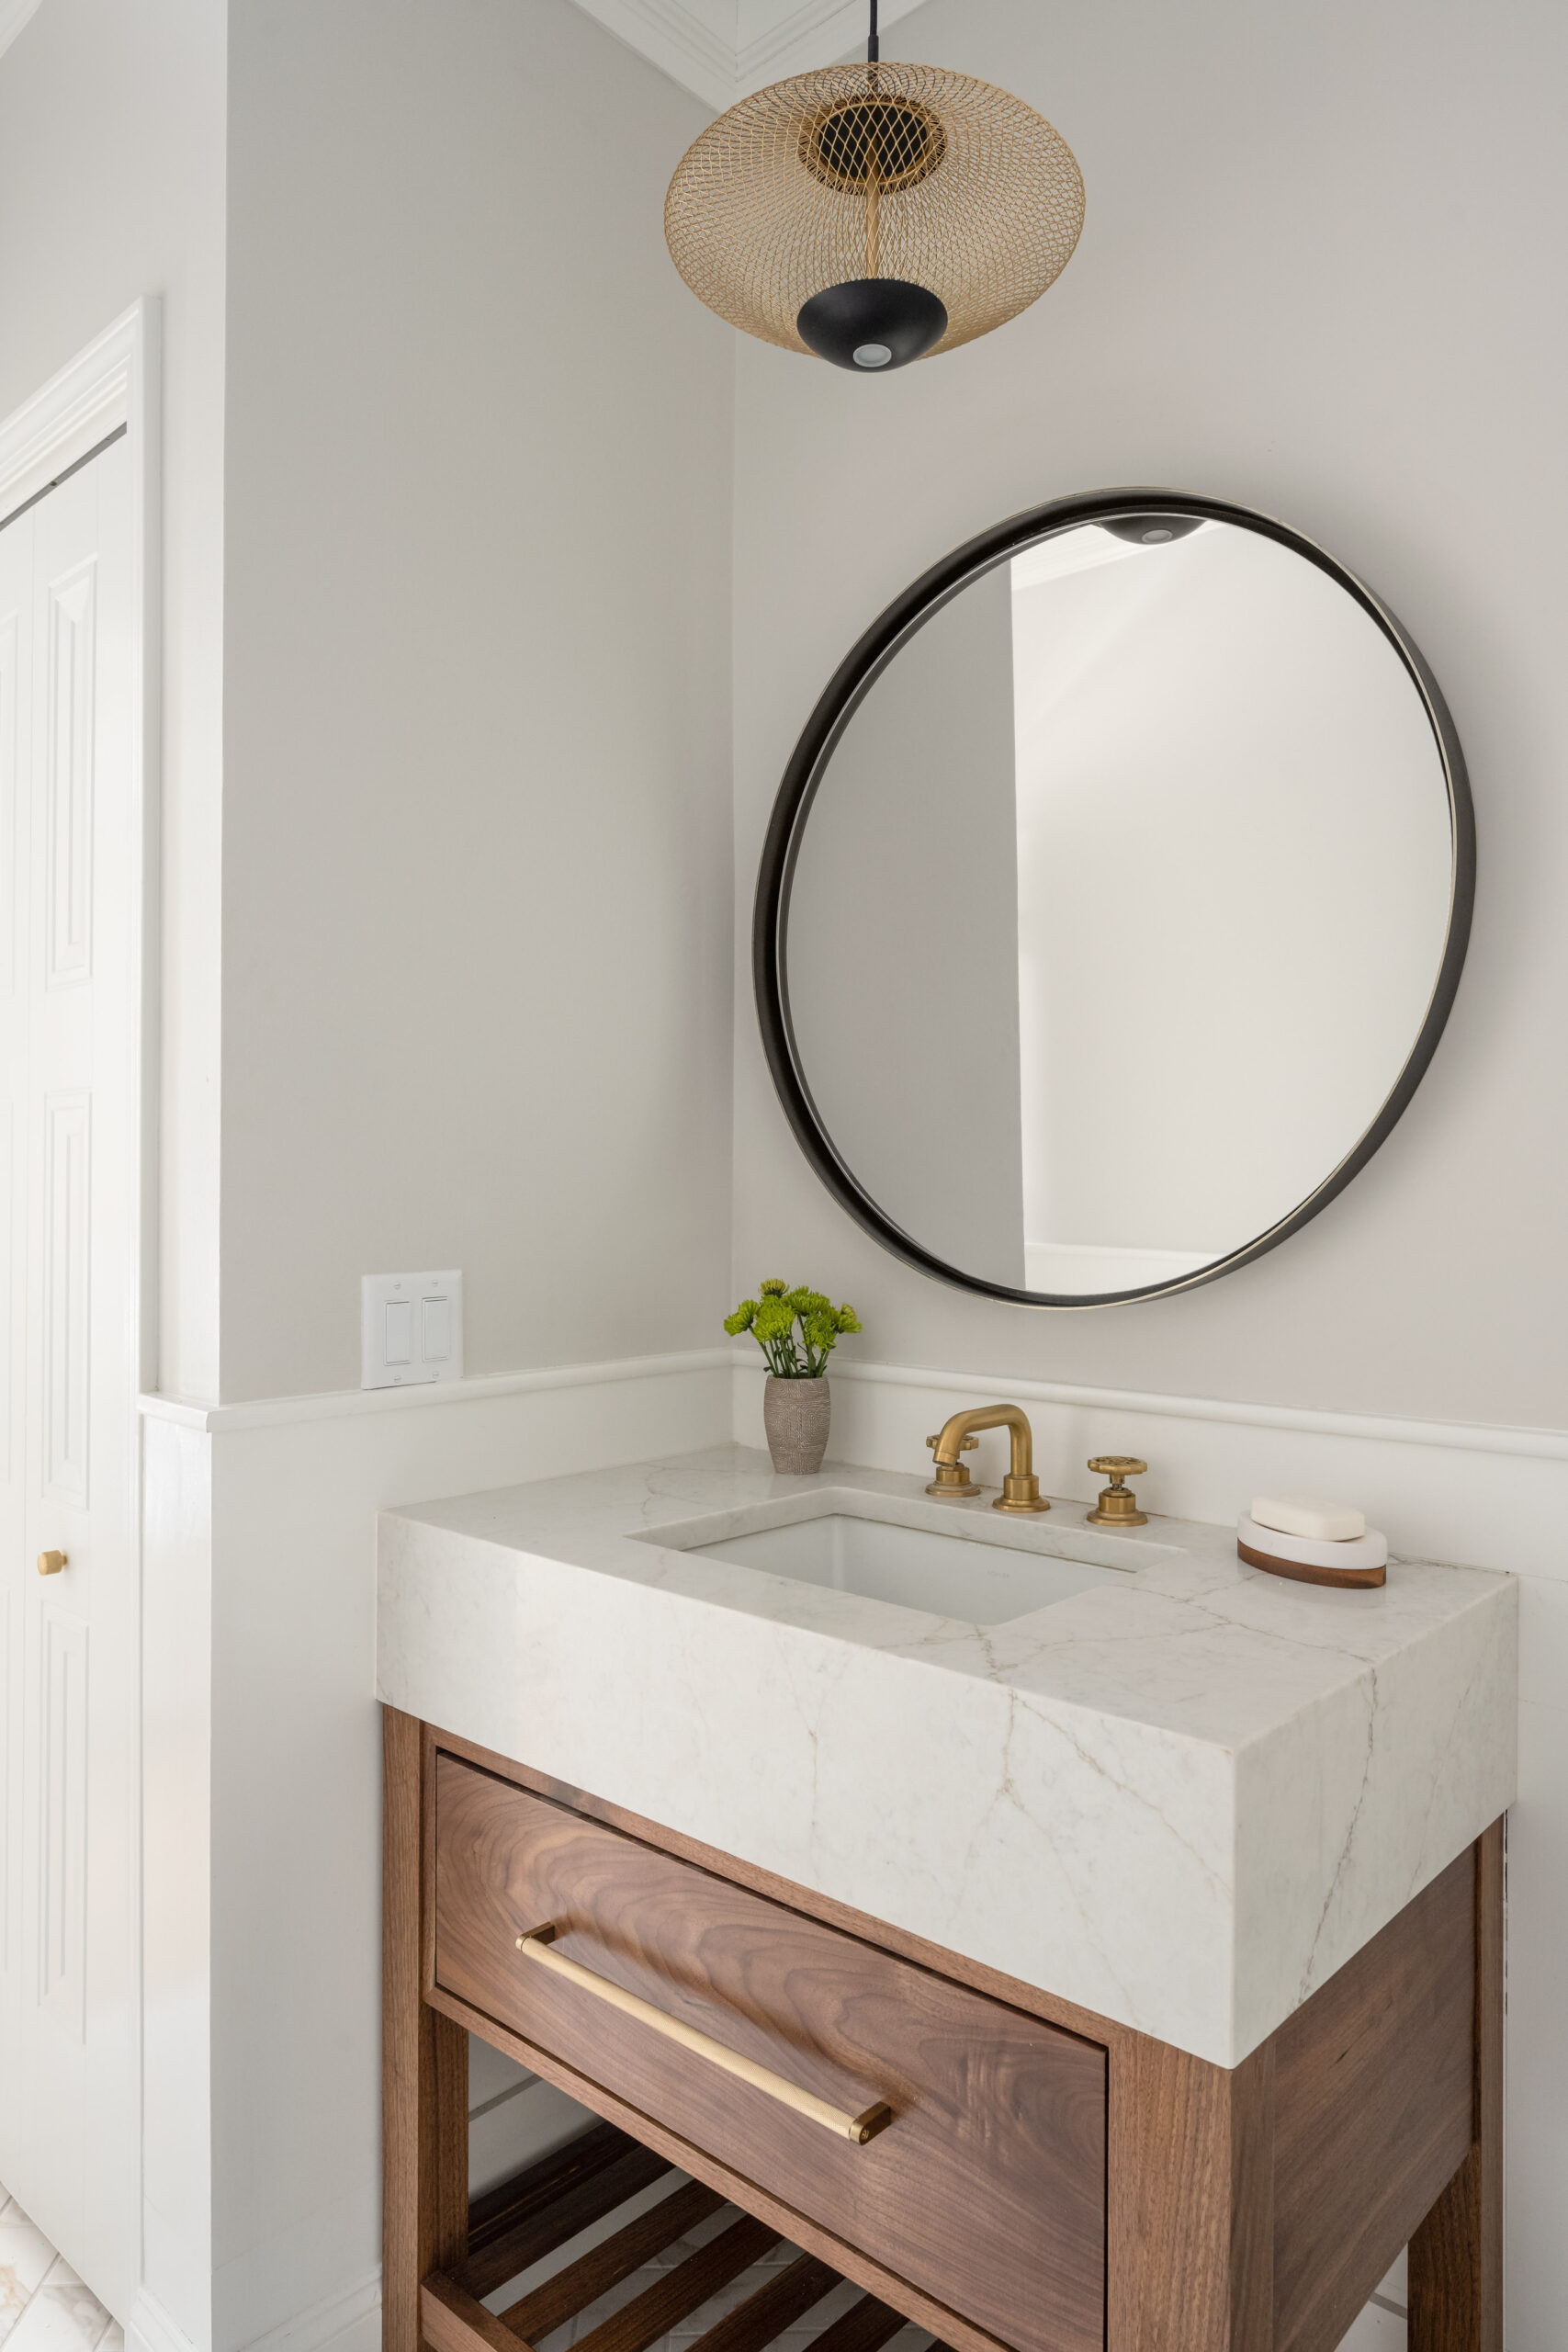 Needham powder room with white and gold floor tile and custom black walnut vanity and wall wainscoting. Design by JP Hoffman Design Build